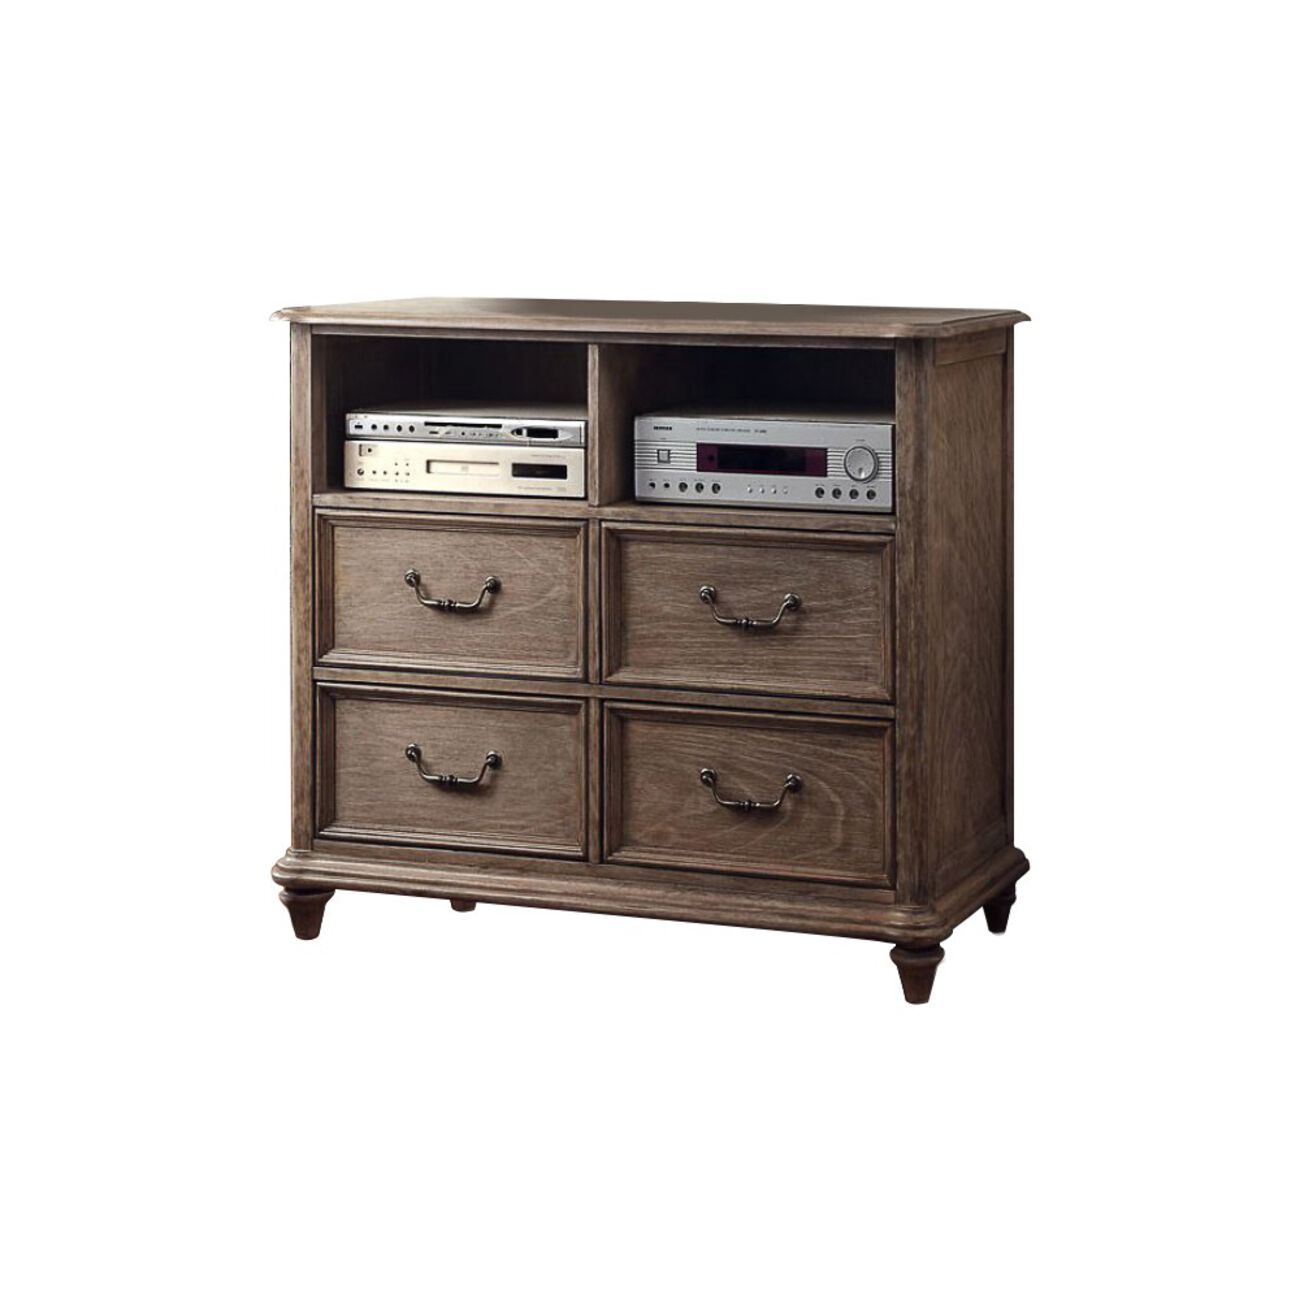 Rustic Wooden Media Chest with open shelves, Brown 